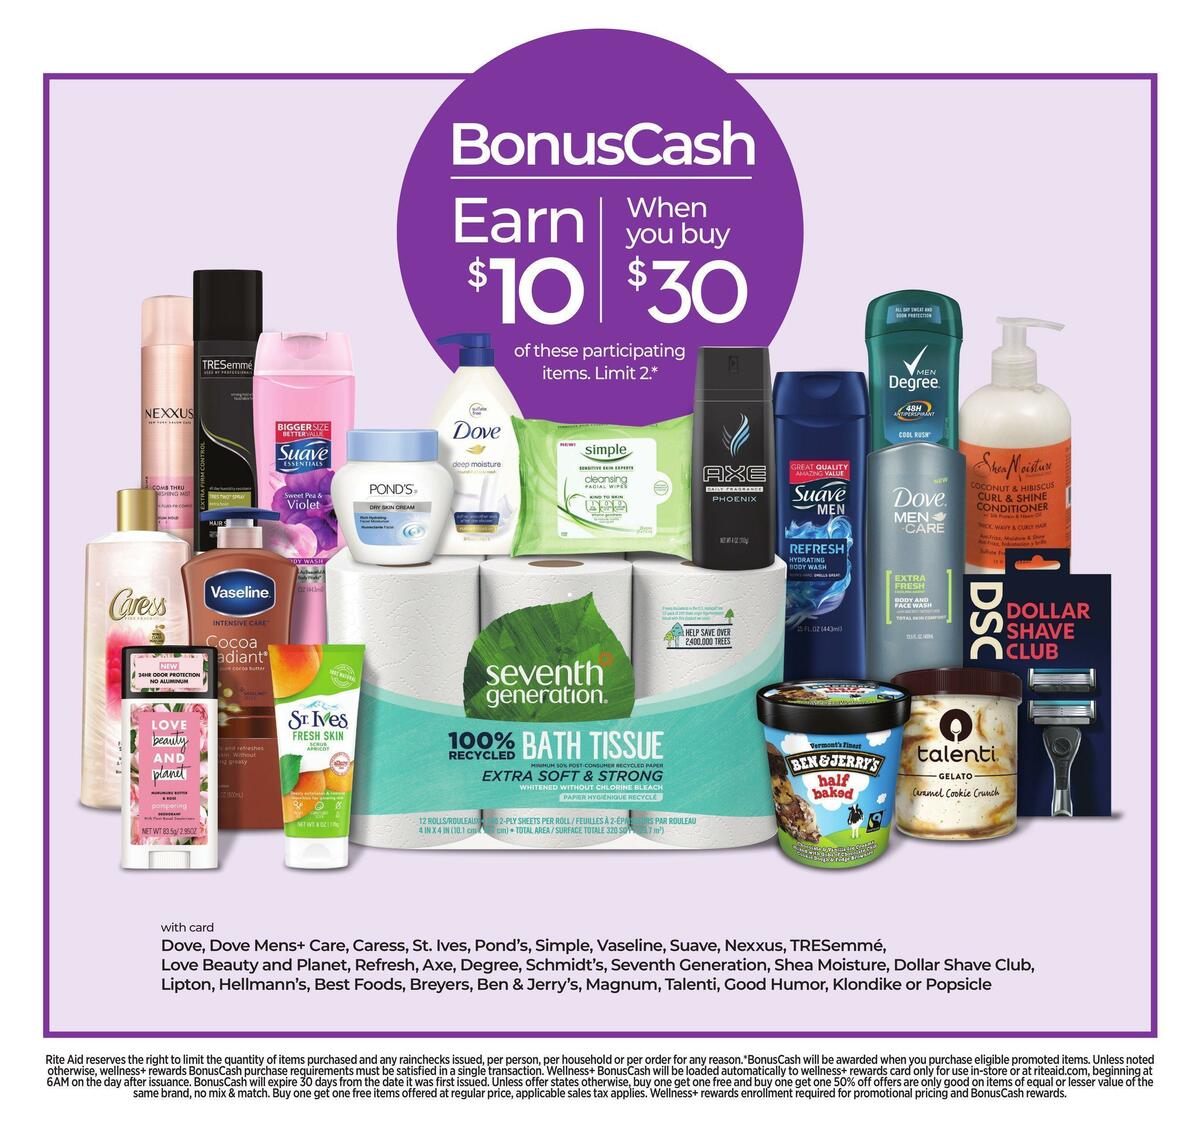 Rite Aid Weekly Ad from August 15